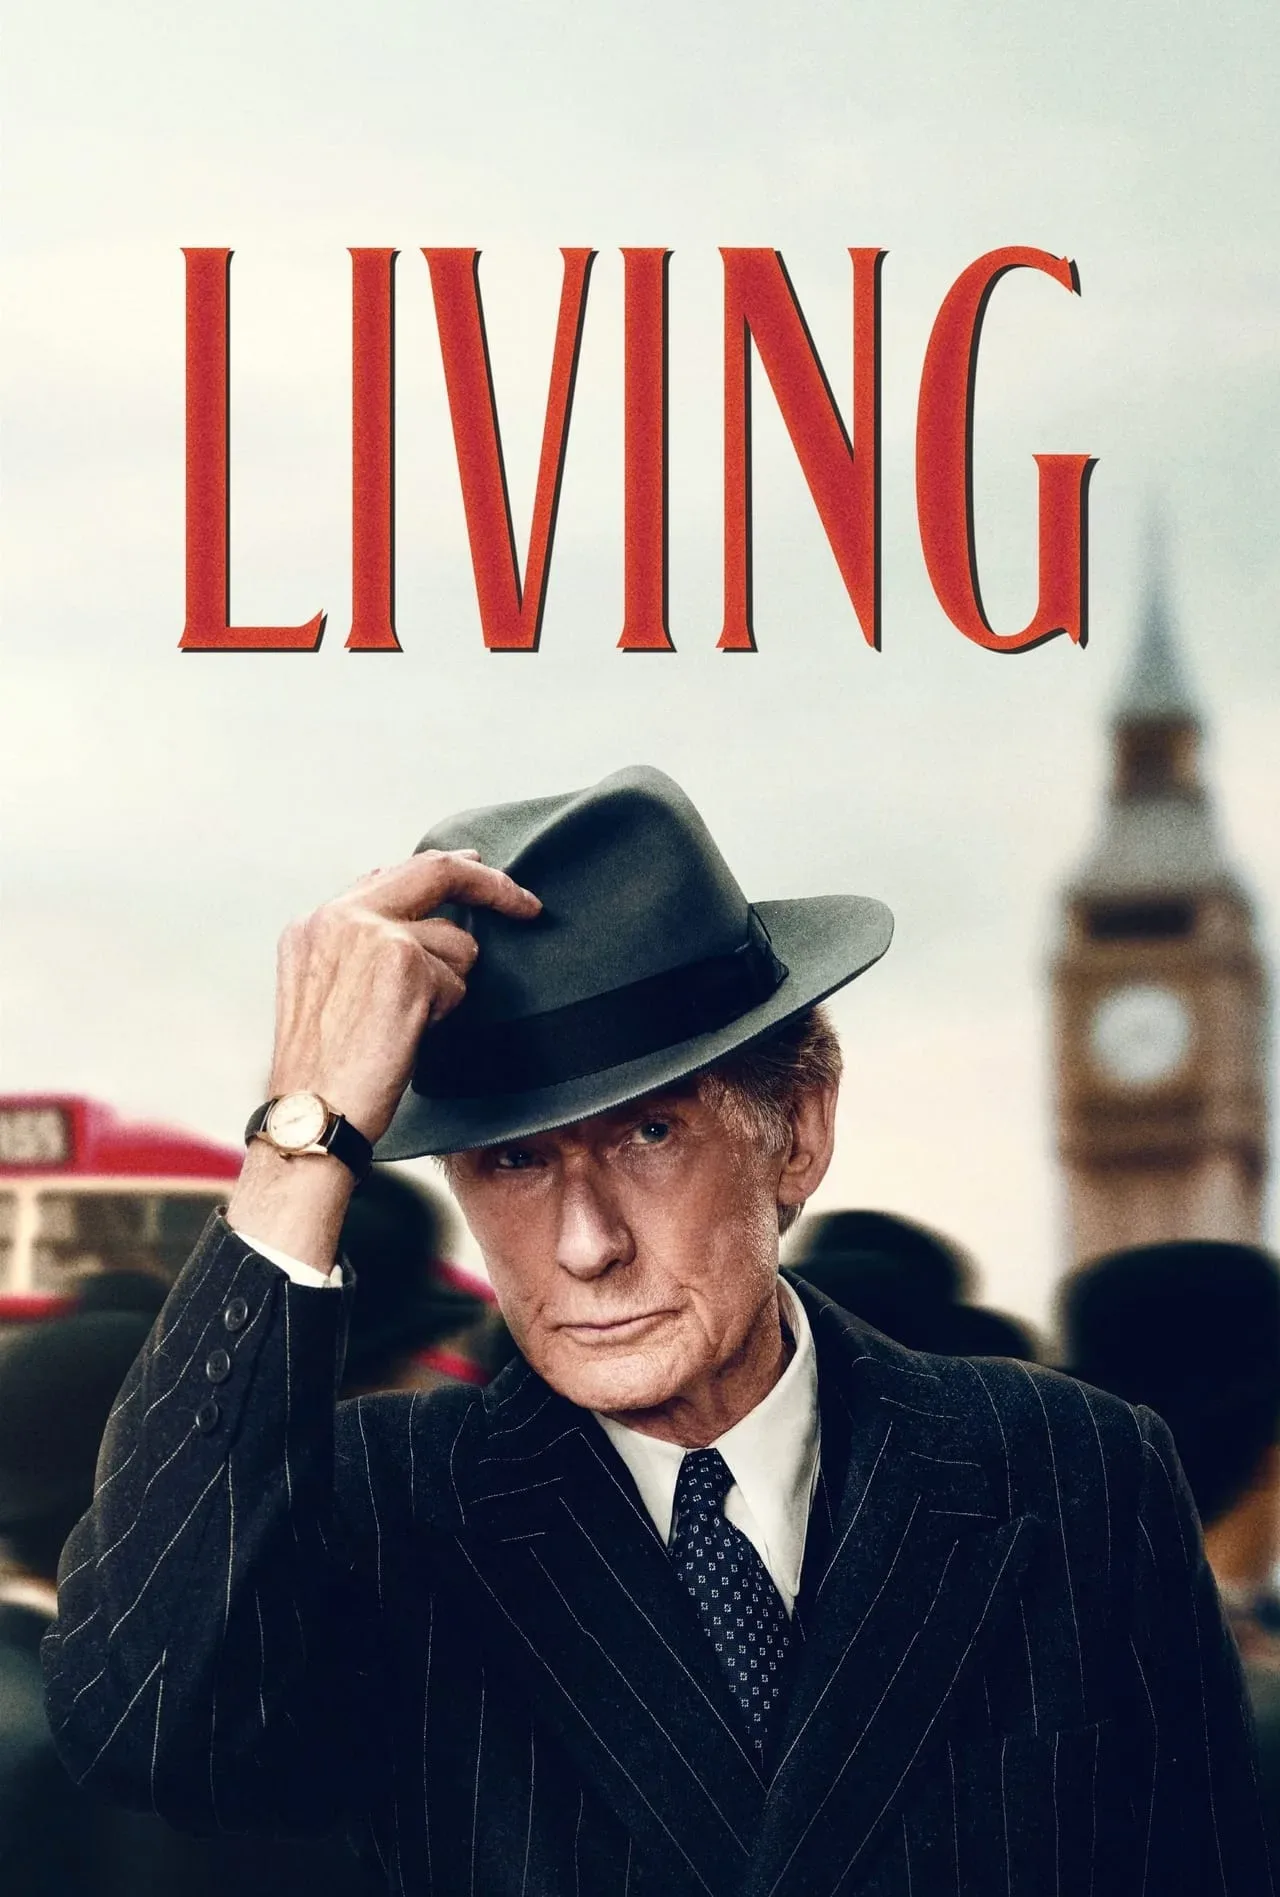 In the movie, Living (2022) - Overwhelmed at work and lonely at home, a civil servant's life takes a heartbreaking turn when a medical diagnosis tells him his time is short.